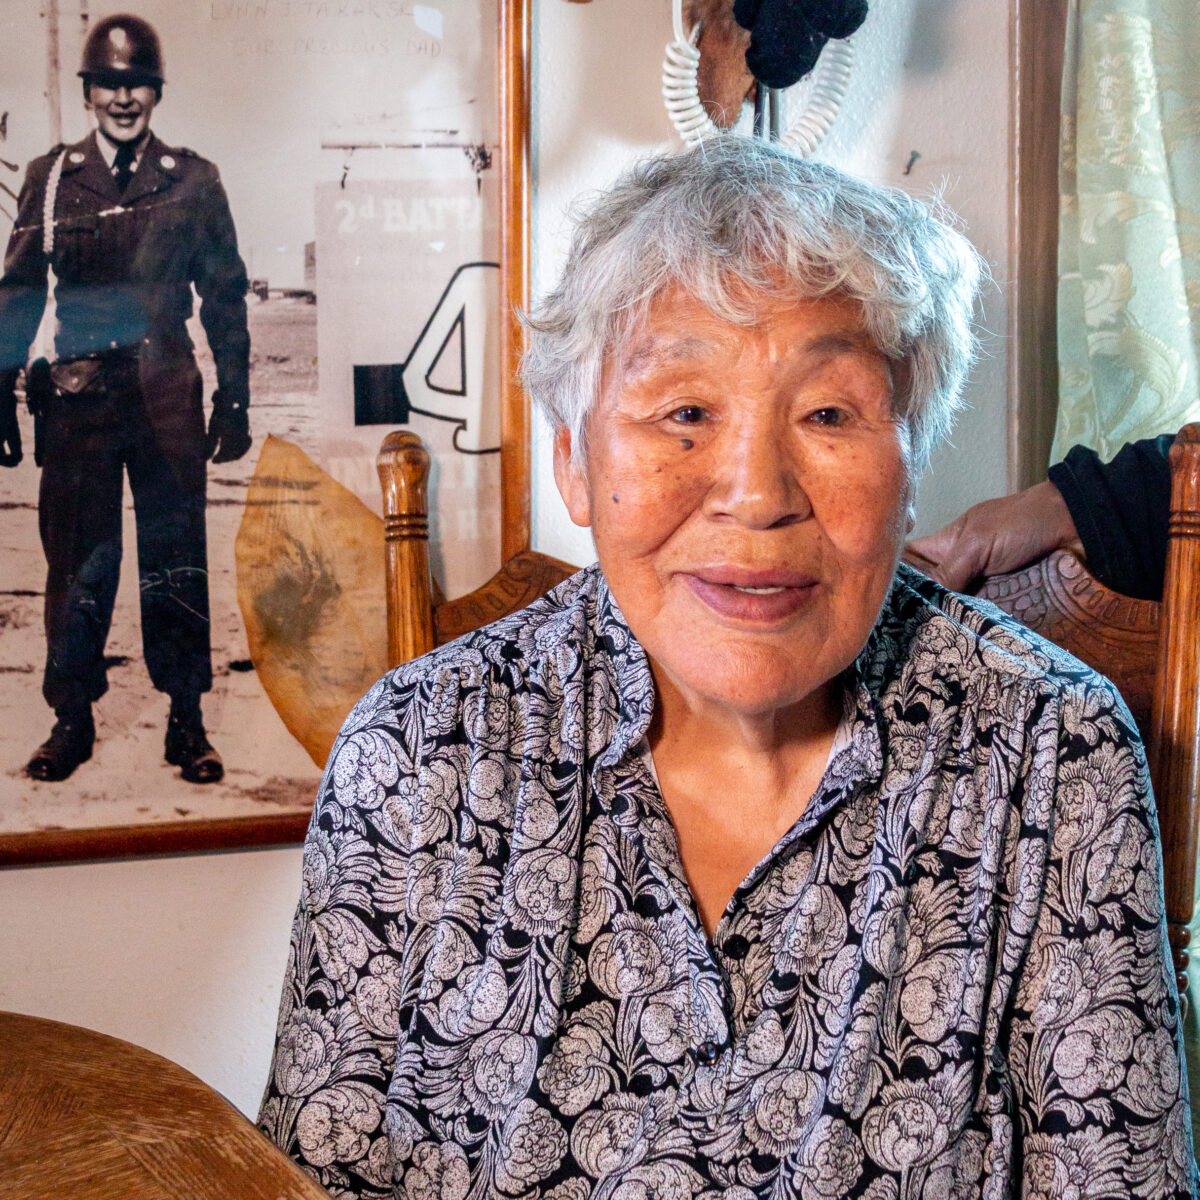 Elderly woman wearing floral-print shirt sits at table with black-and-white photo of man in uniform framed on wall behind her.